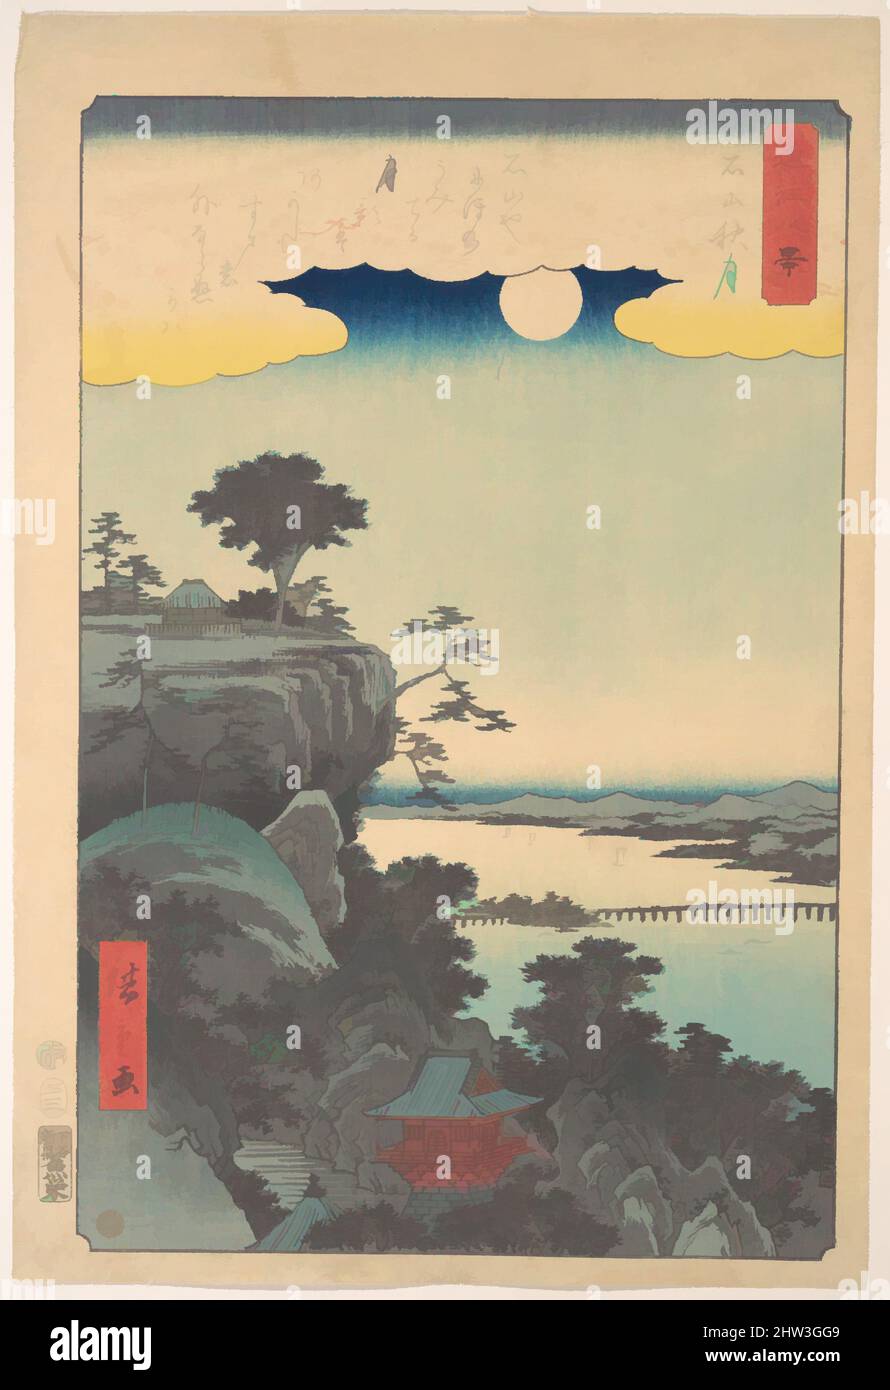 Art inspired by 近江八景　石山秋月, The Autumn Moon on Ishiyama, Edo period (1615–1868), 1857, Japan, Polychrome woodblock print; ink and color on paper, H. 14 5/8 in. (37.1 cm); W. 9 15/16 in. (25.2 cm), Prints, Utagawa Hiroshige (Japanese, Tokyo (Edo) 1797–1858 Tokyo (Edo, Classic works modernized by Artotop with a splash of modernity. Shapes, color and value, eye-catching visual impact on art. Emotions through freedom of artworks in a contemporary way. A timeless message pursuing a wildly creative new direction. Artists turning to the digital medium and creating the Artotop NFT Stock Photo